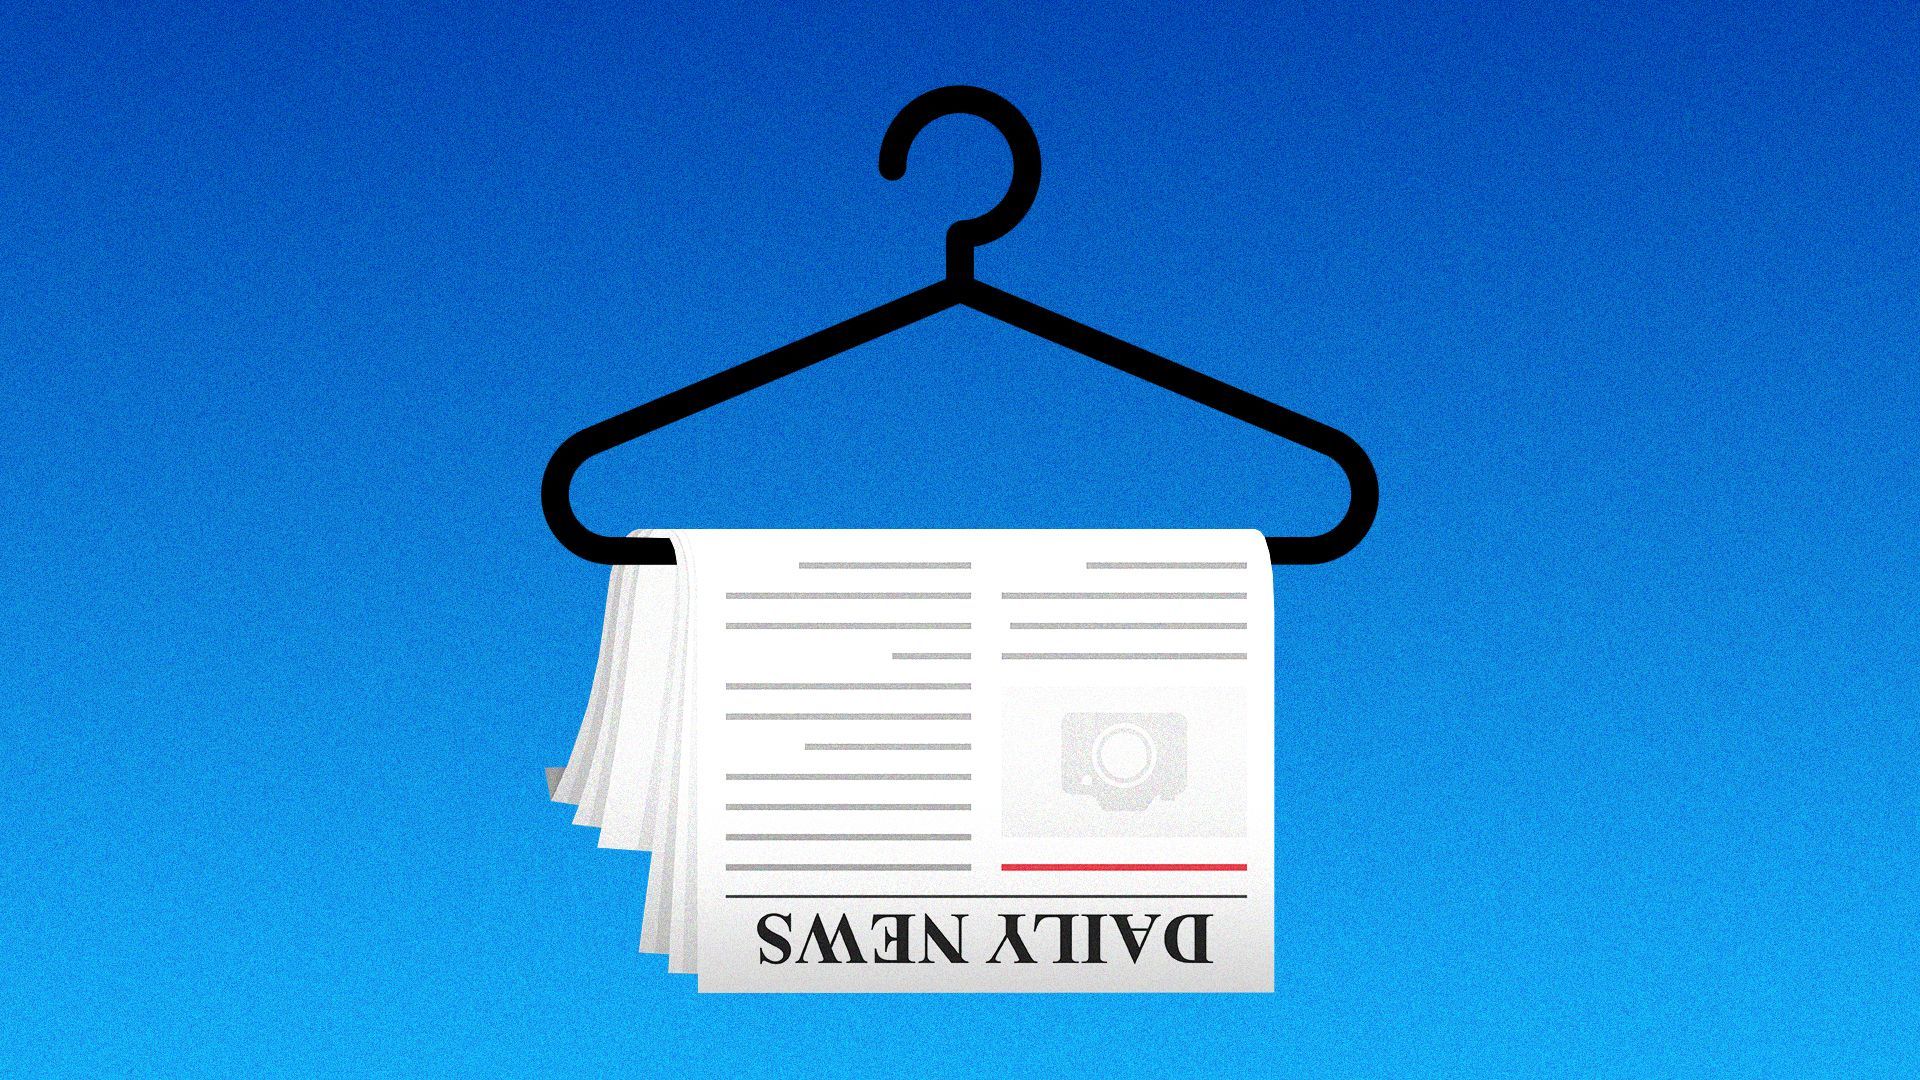 Illustration of a clothes hanger holding a draped daily newspaper